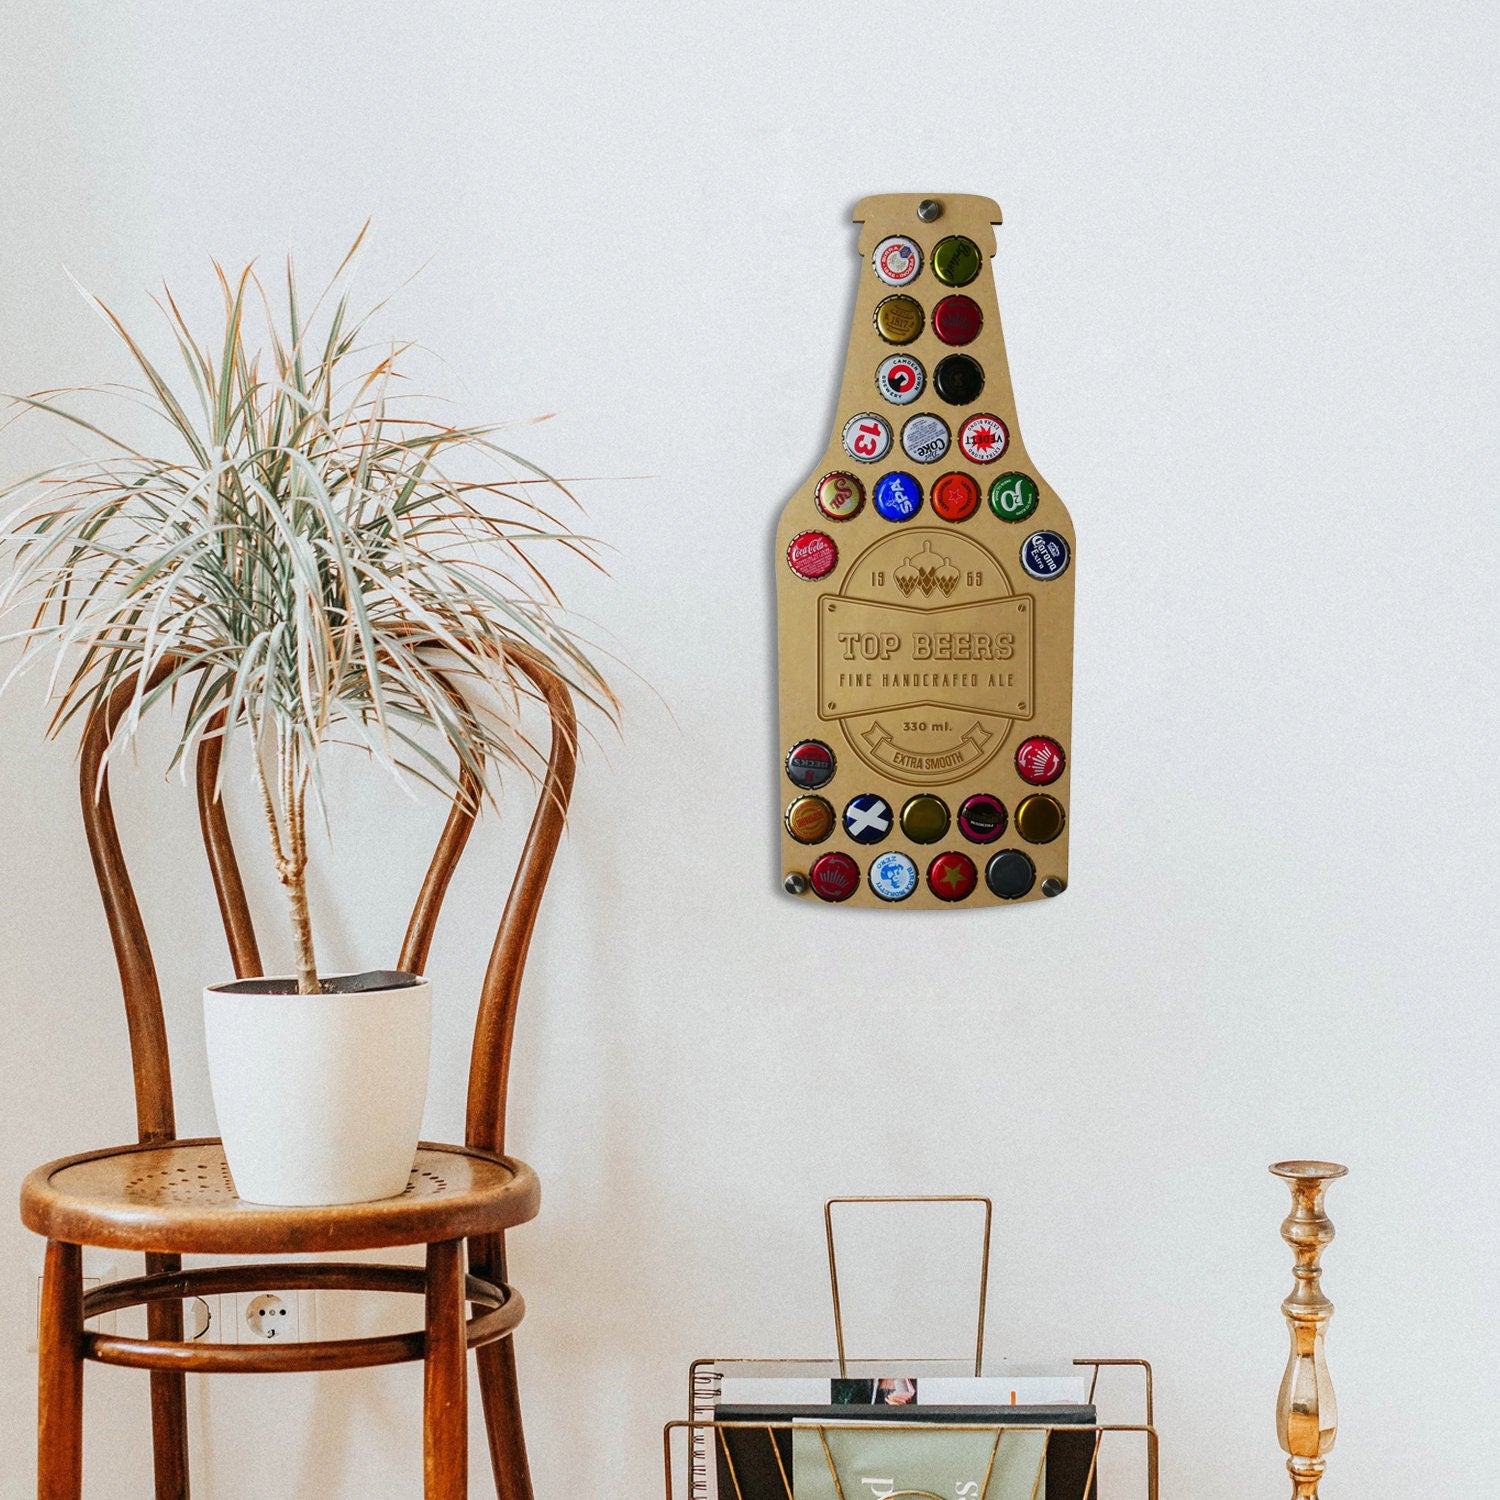 Top Beers Bottle Cap Display Piece, Holds 26 Bottle Tops - Non Personalised